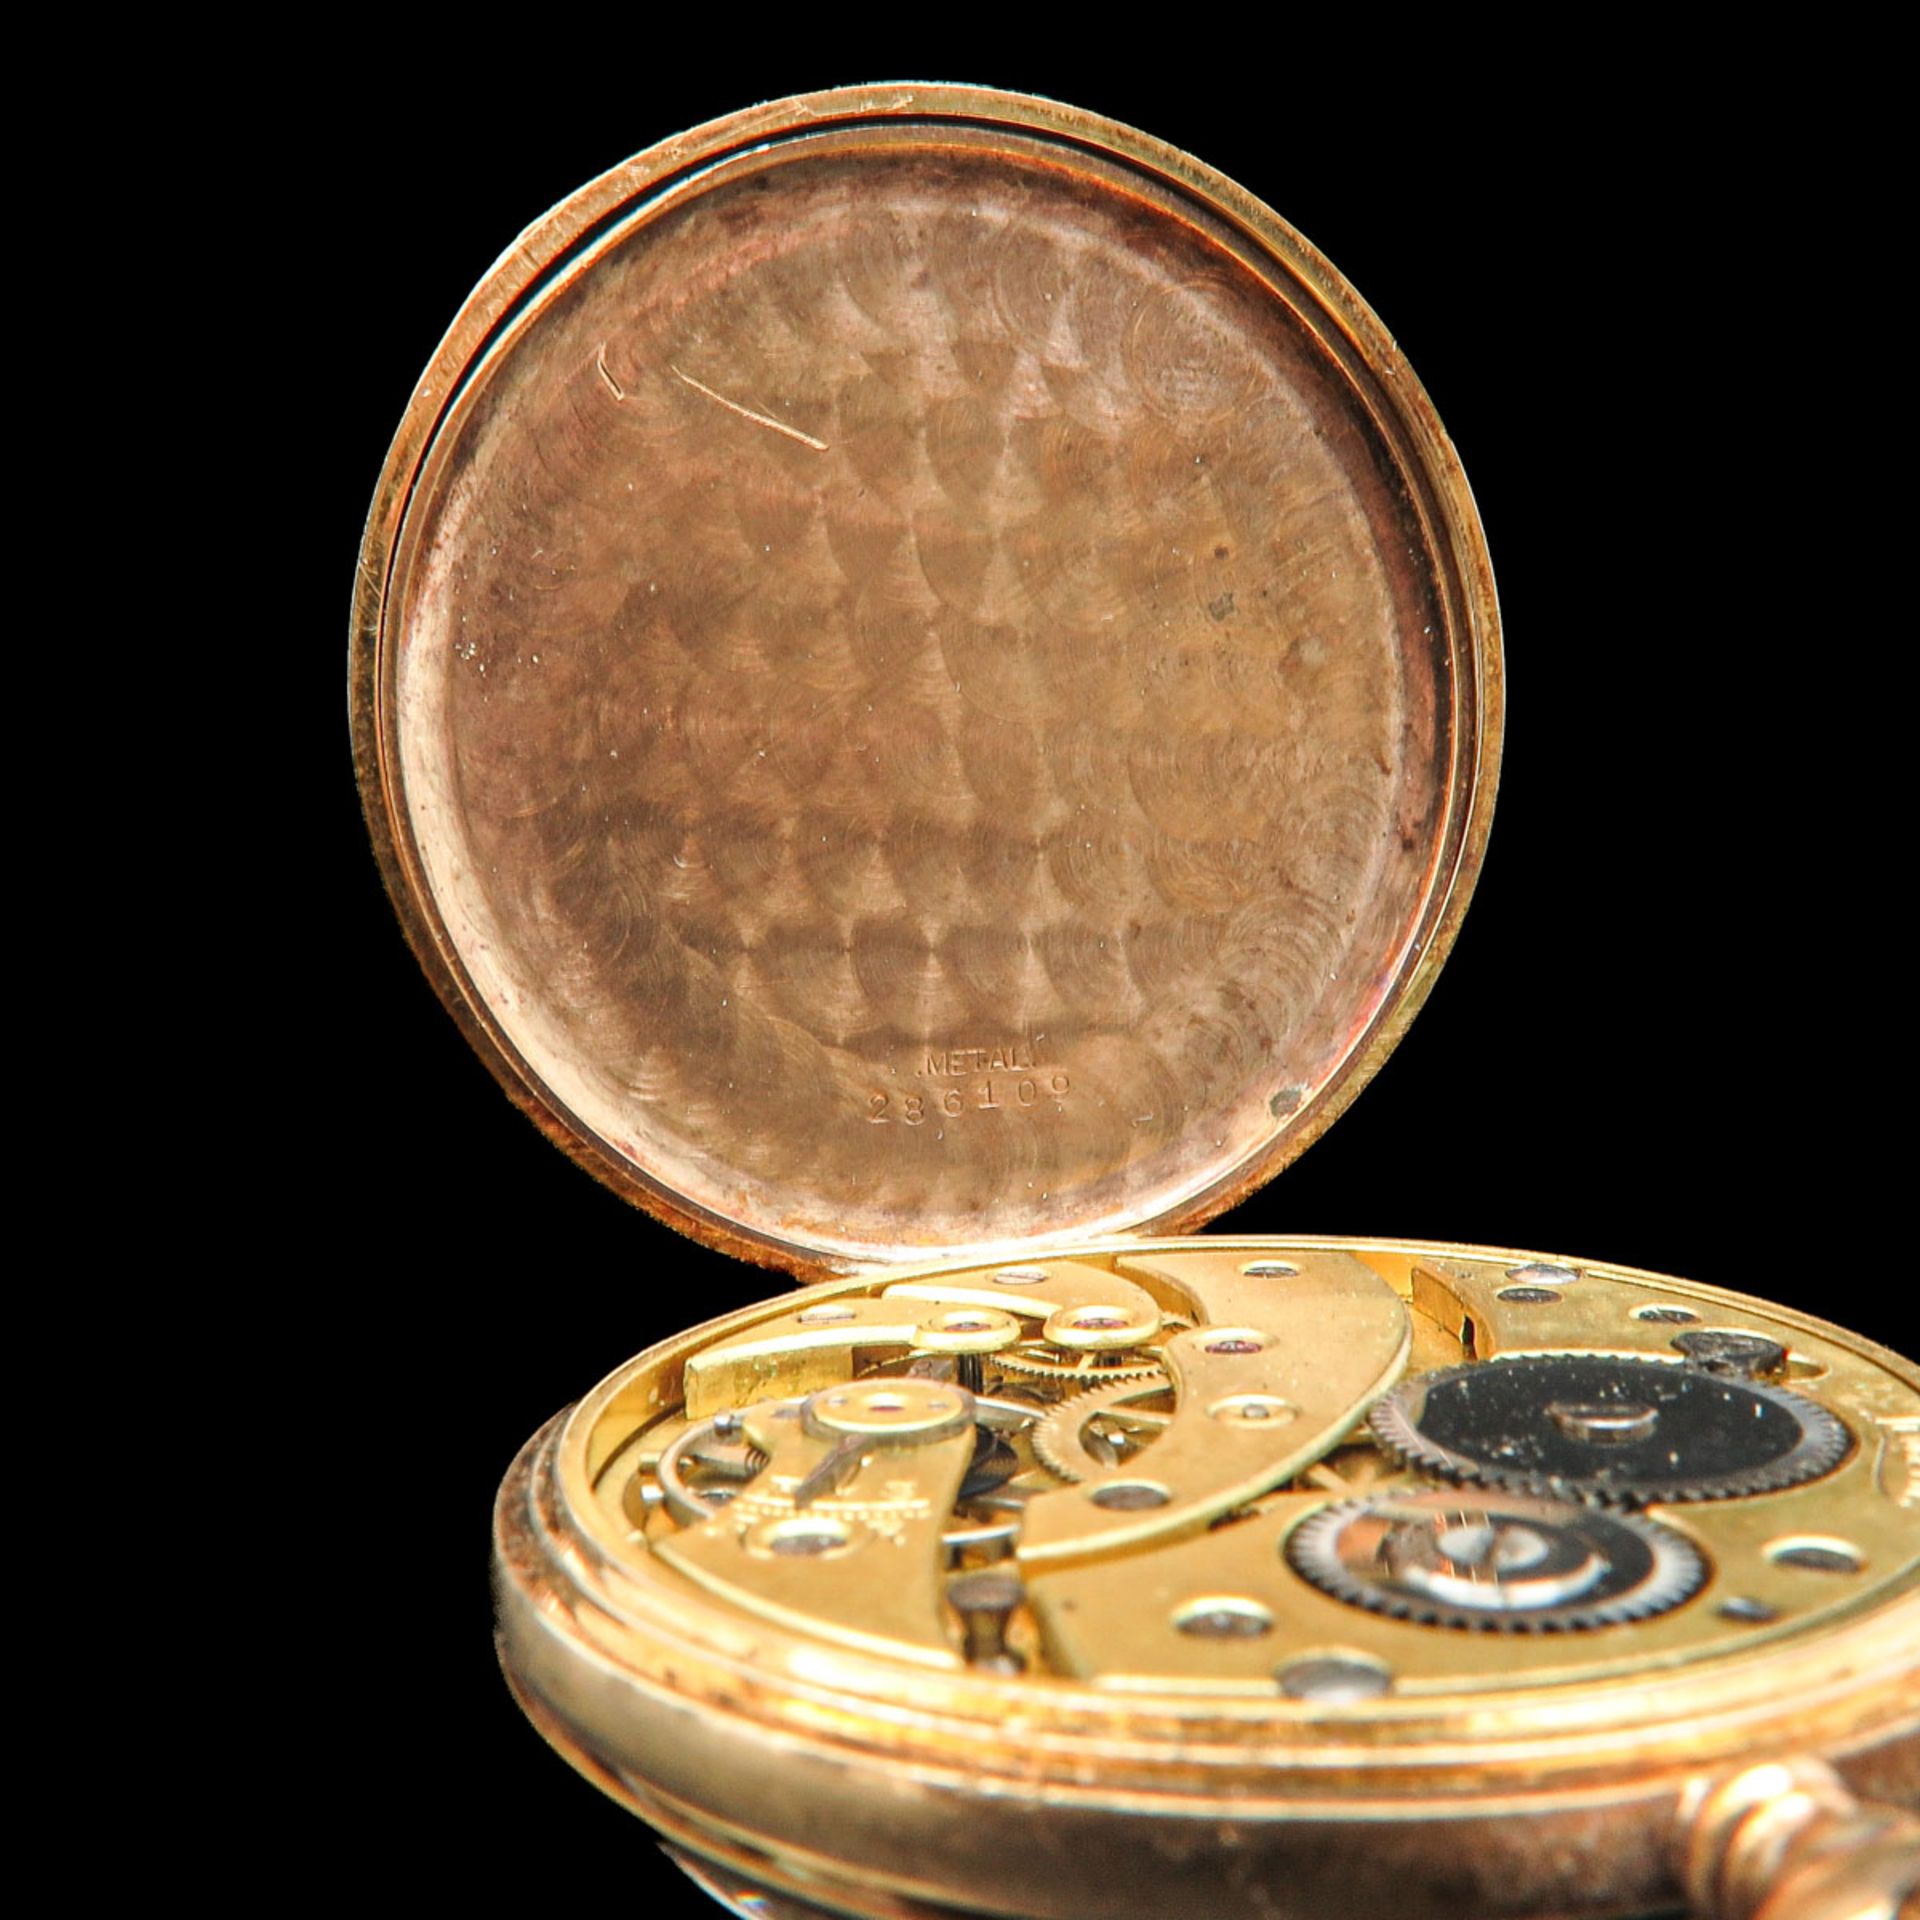 A Pocket Watch Holder with Pocket Watch - Image 7 of 7